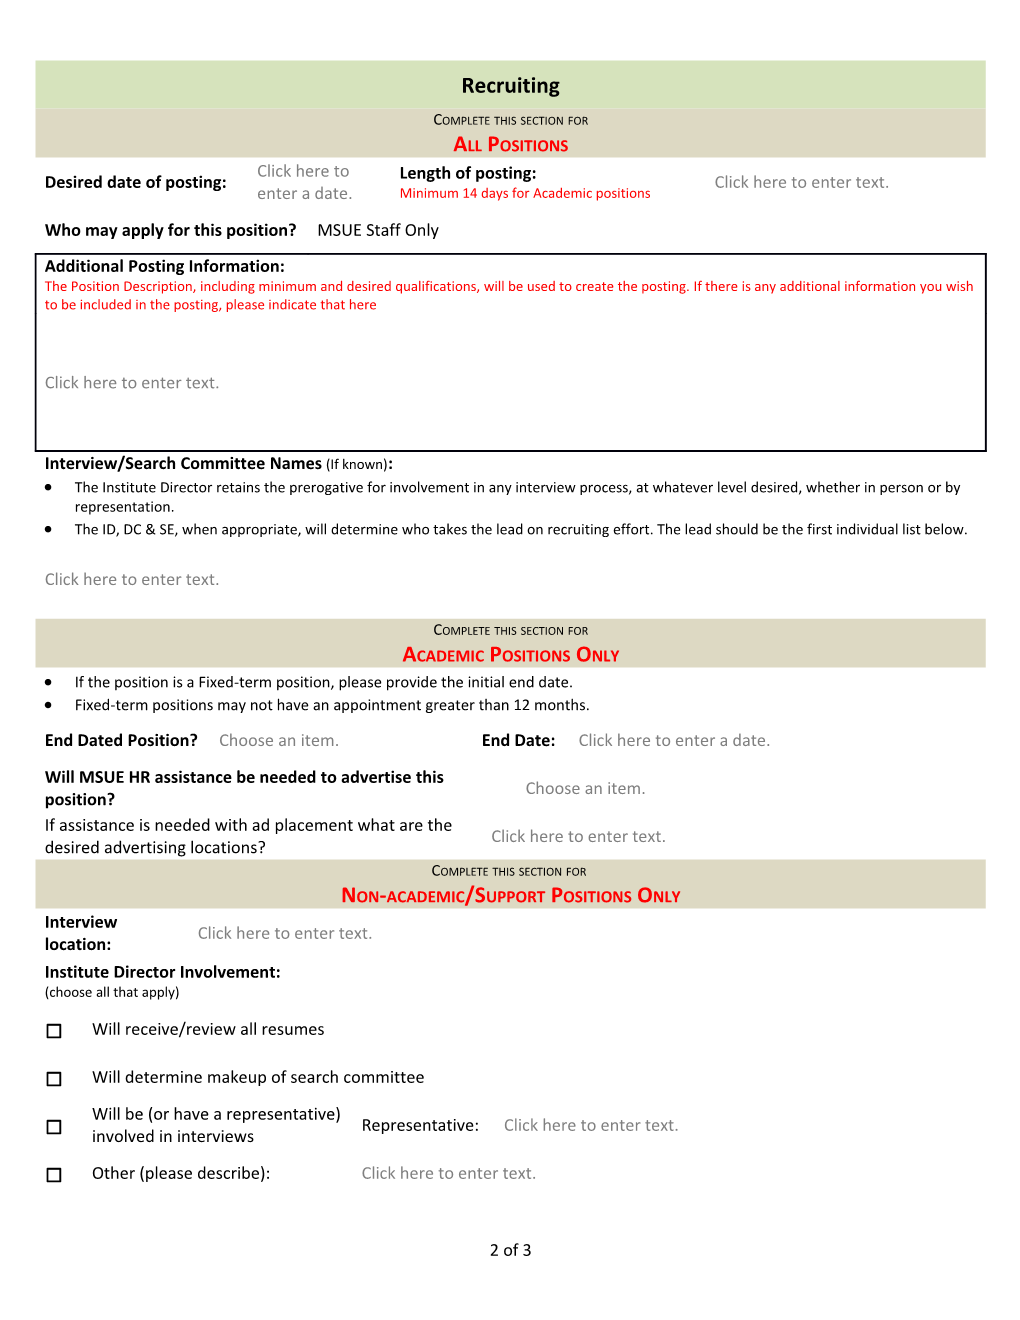 Include an Updated Position Description When Sending This Document to MSUE HR